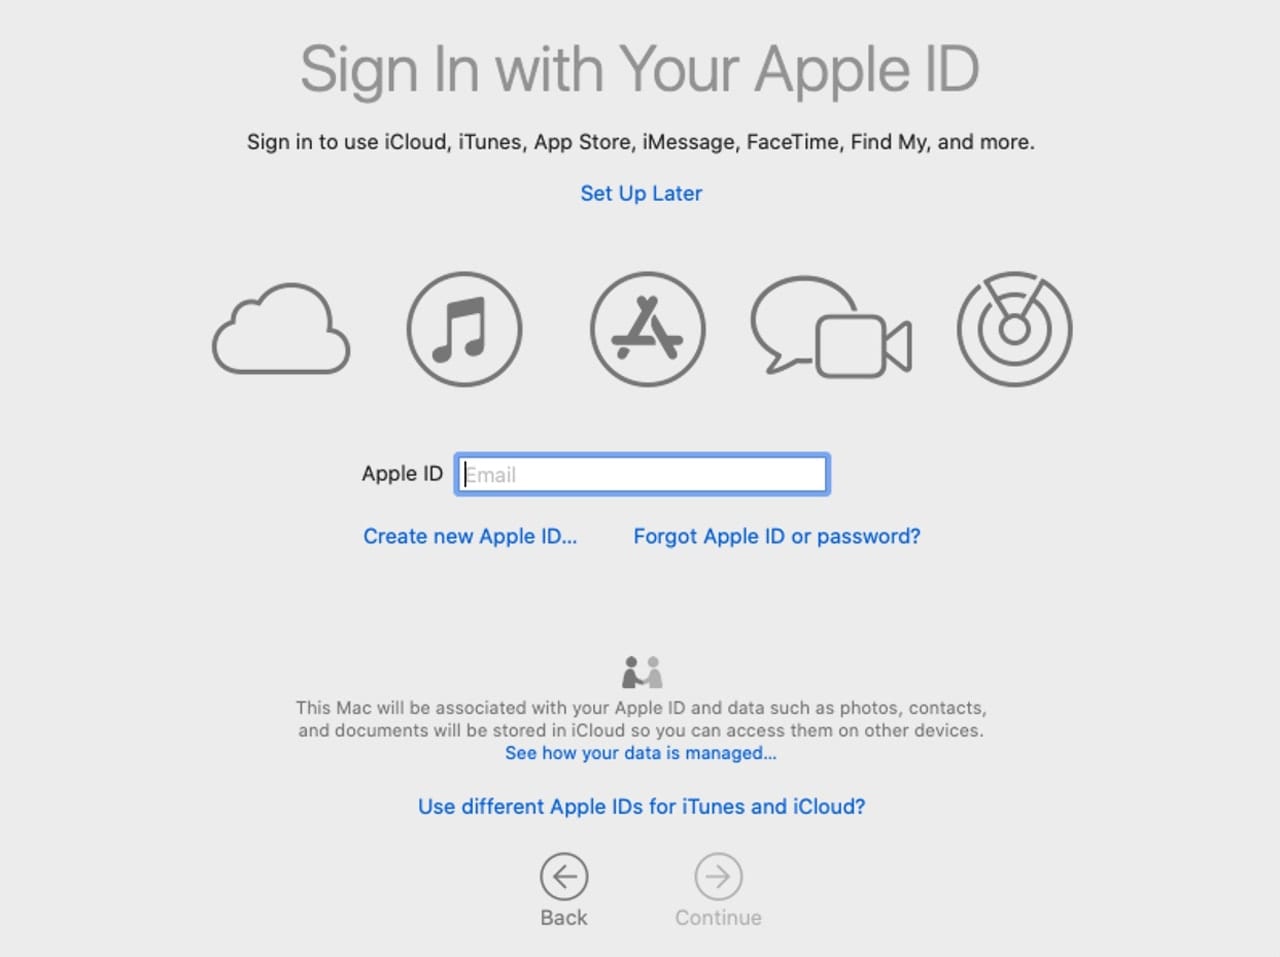 Enter your Apple ID to allow setup to configure multiple services for you.